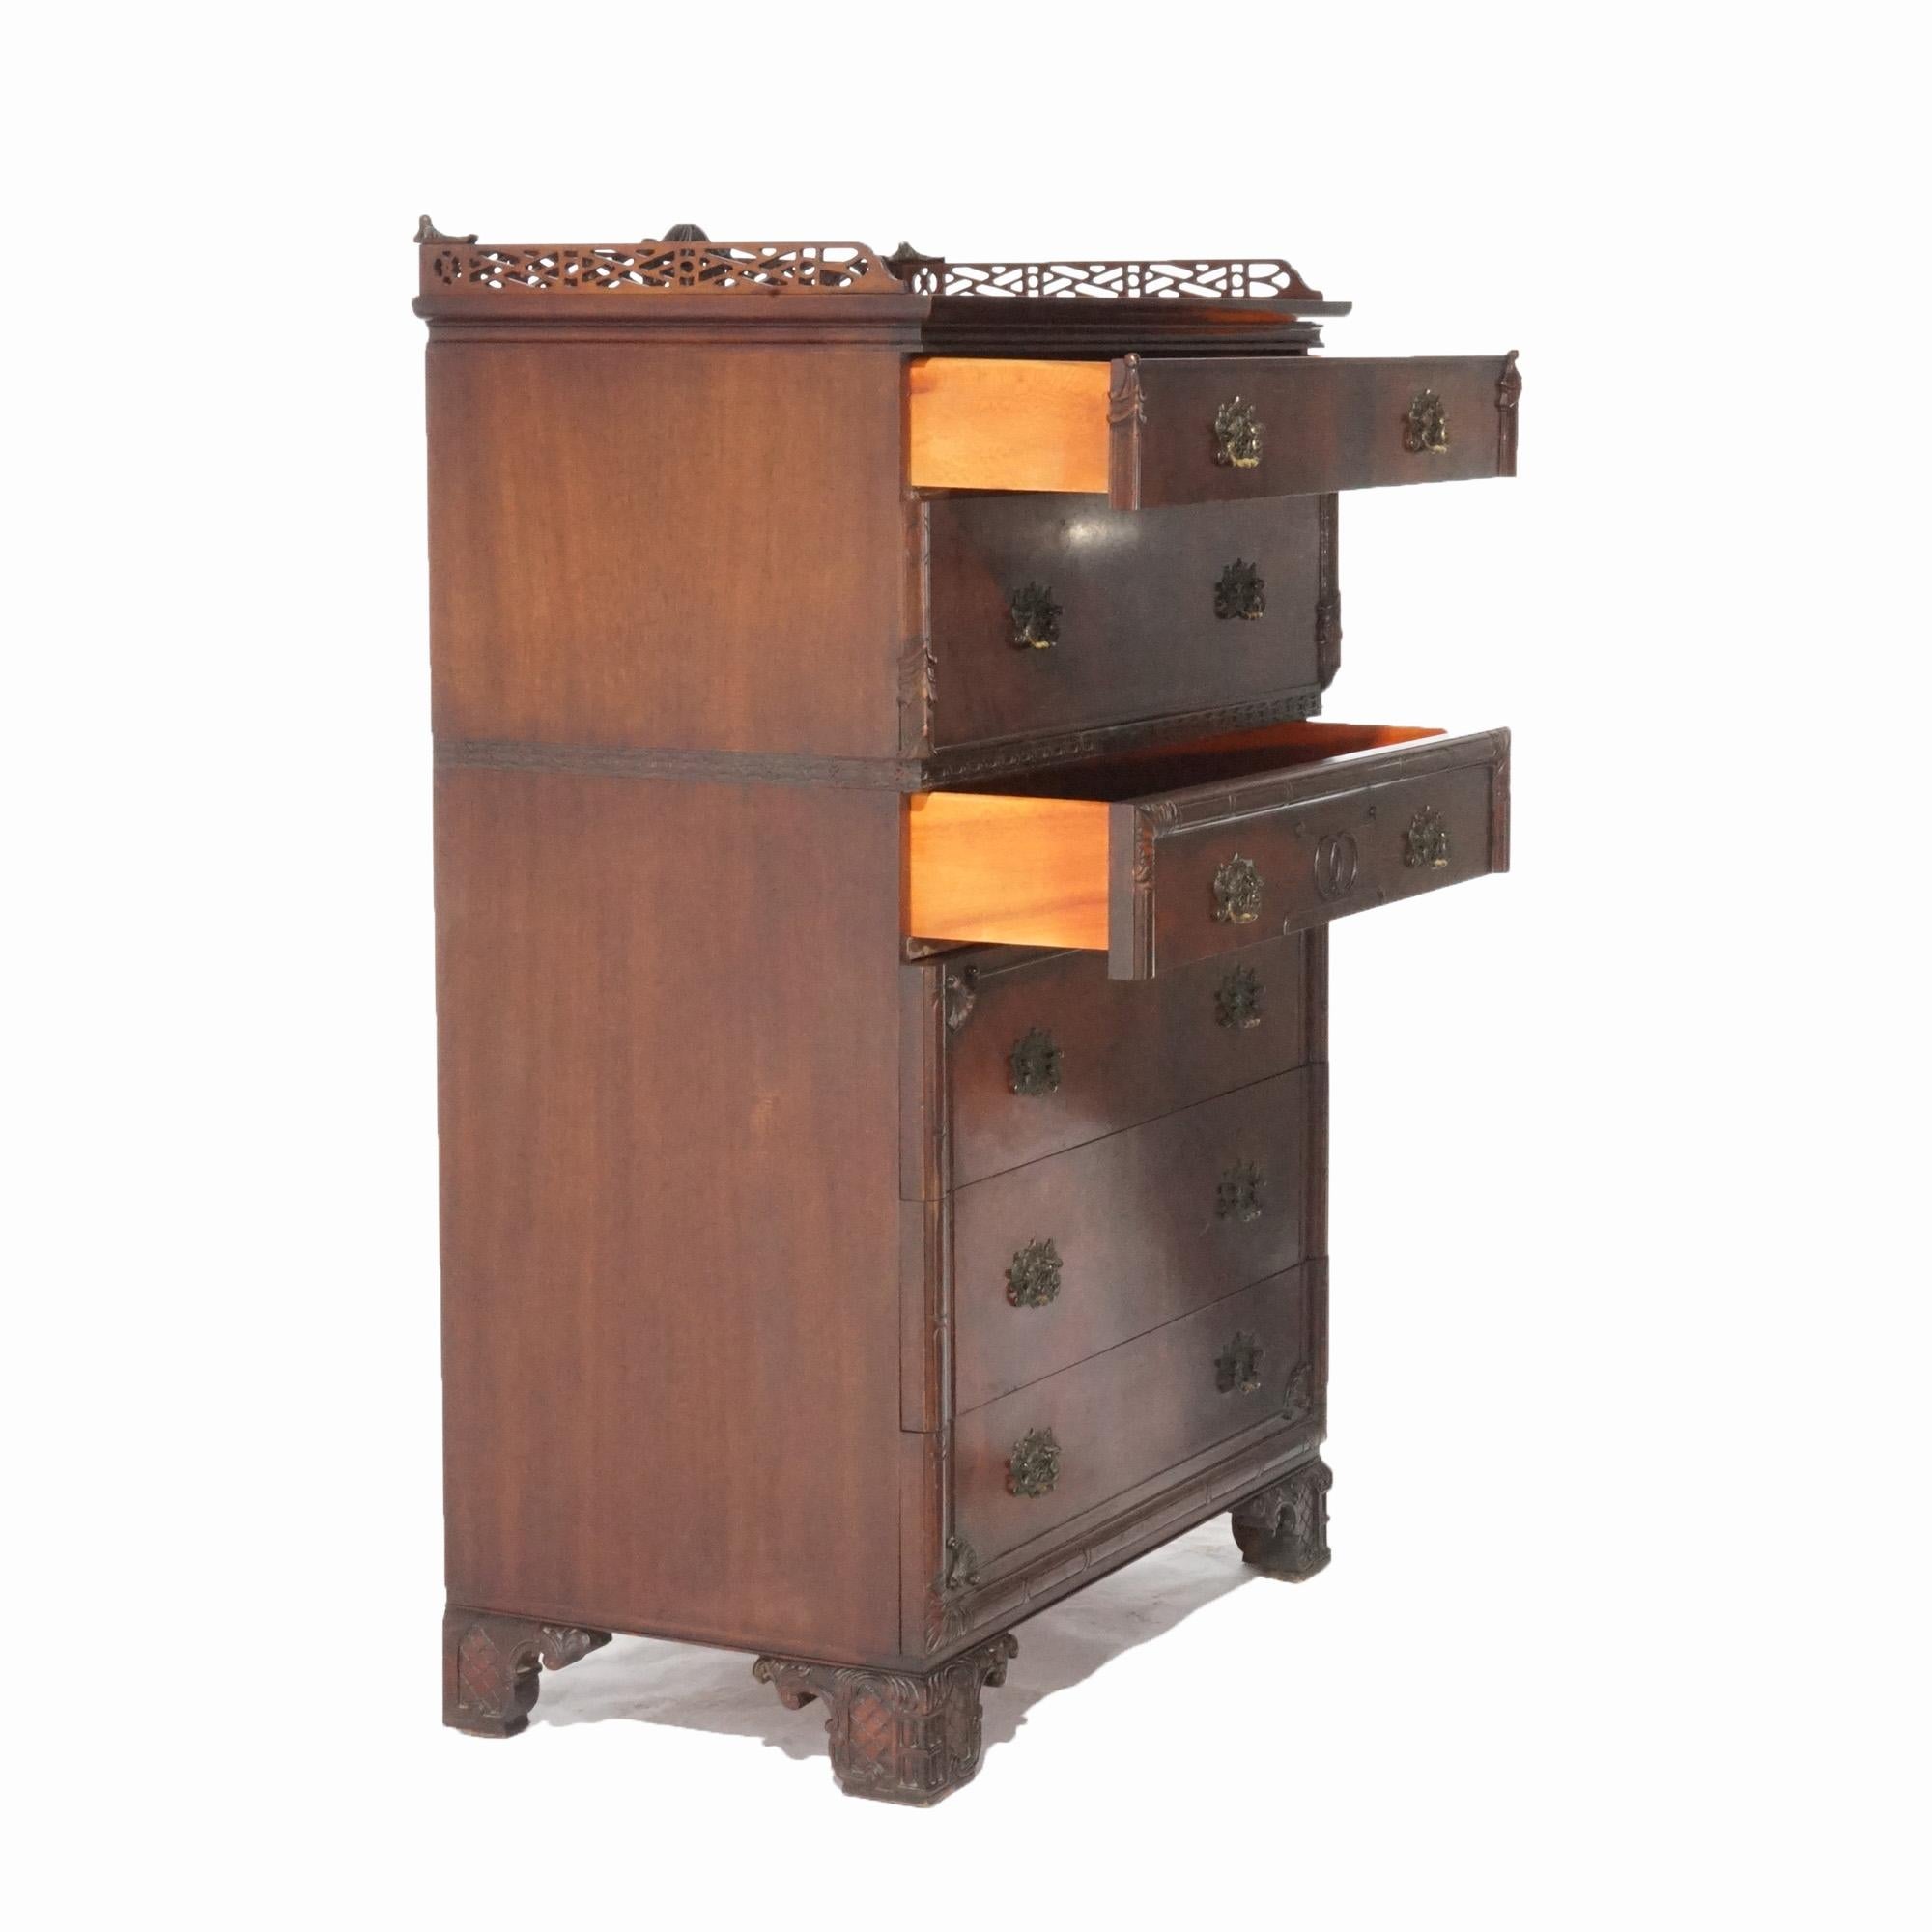 A Chinese Chippendale high chest offers flame mahogany construction with upper pierced rail over case having six long drawers, raised on stylized bracket feet, circa 1940

Measures- 56''H x 36.5''W x 21''D

Catalogue Note: Ask about DISCOUNTED